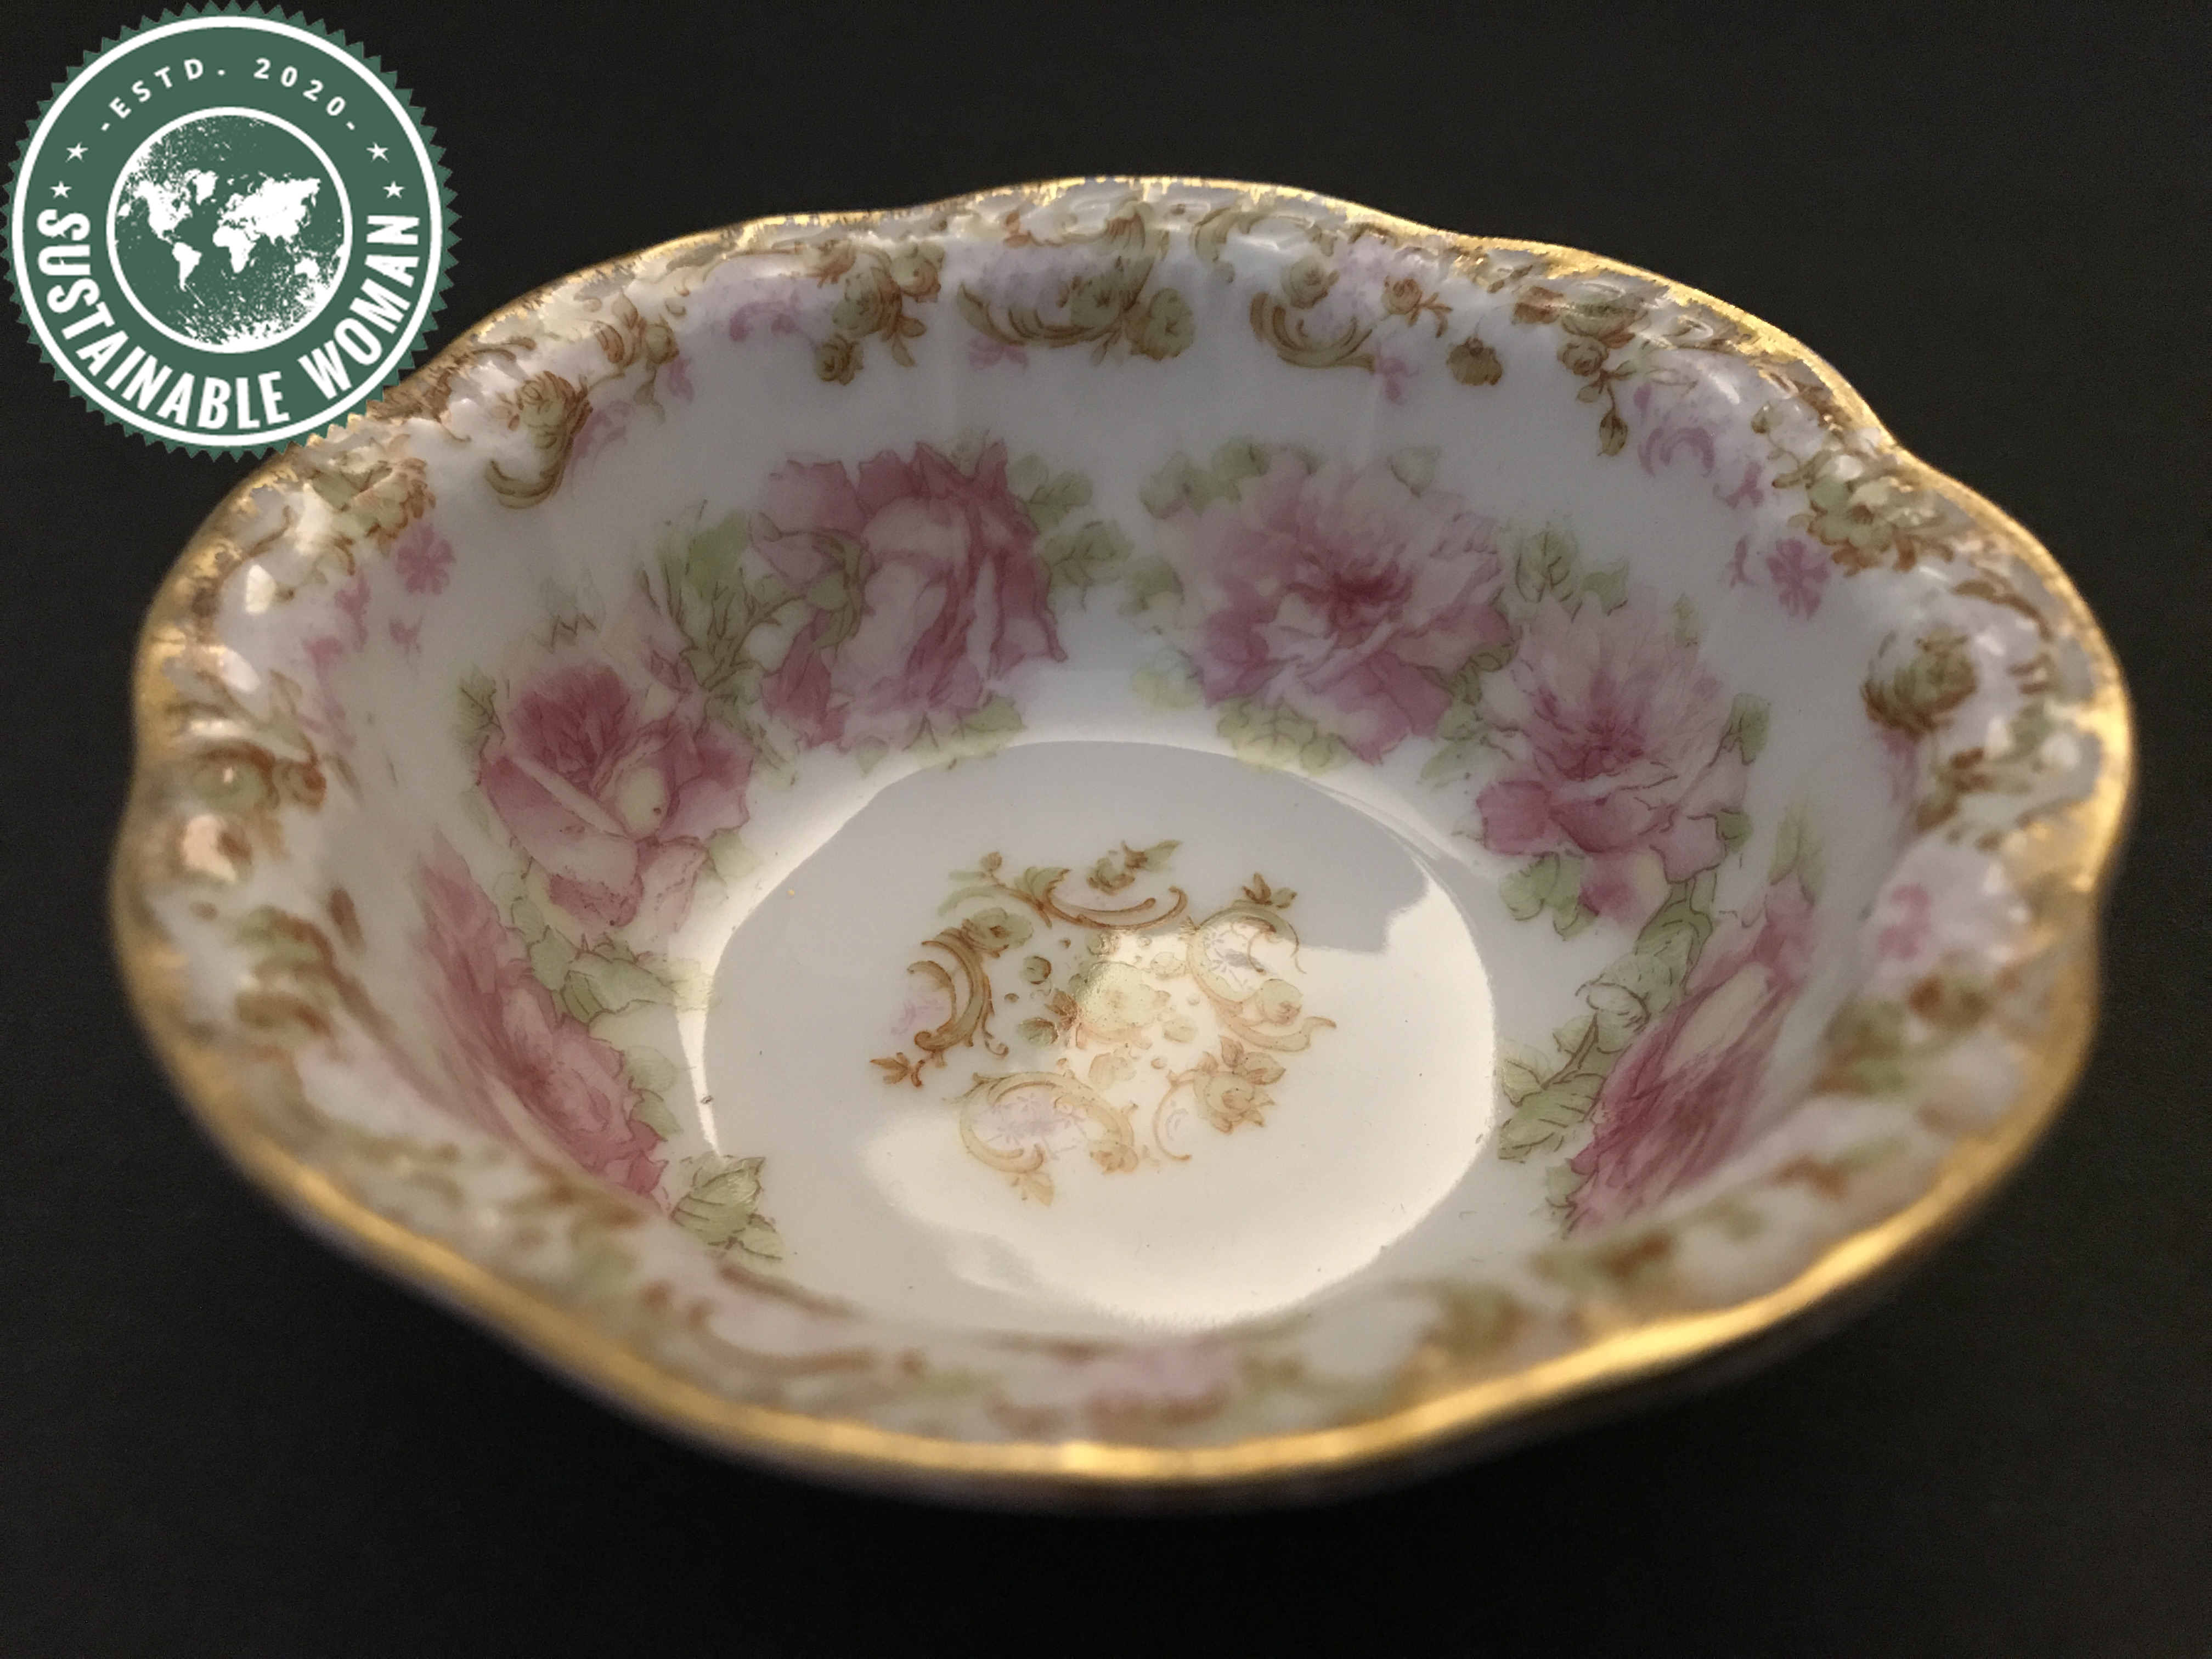 Antique Circa 1800's French Custard Dish. Schleiger #55 France Haviland Limoges Soufflé Dish. 19th Century Small Old-Fashioned Ramekin Dessert Bowl. Fine Gilded Porcelain in Pink Roses Pattern.